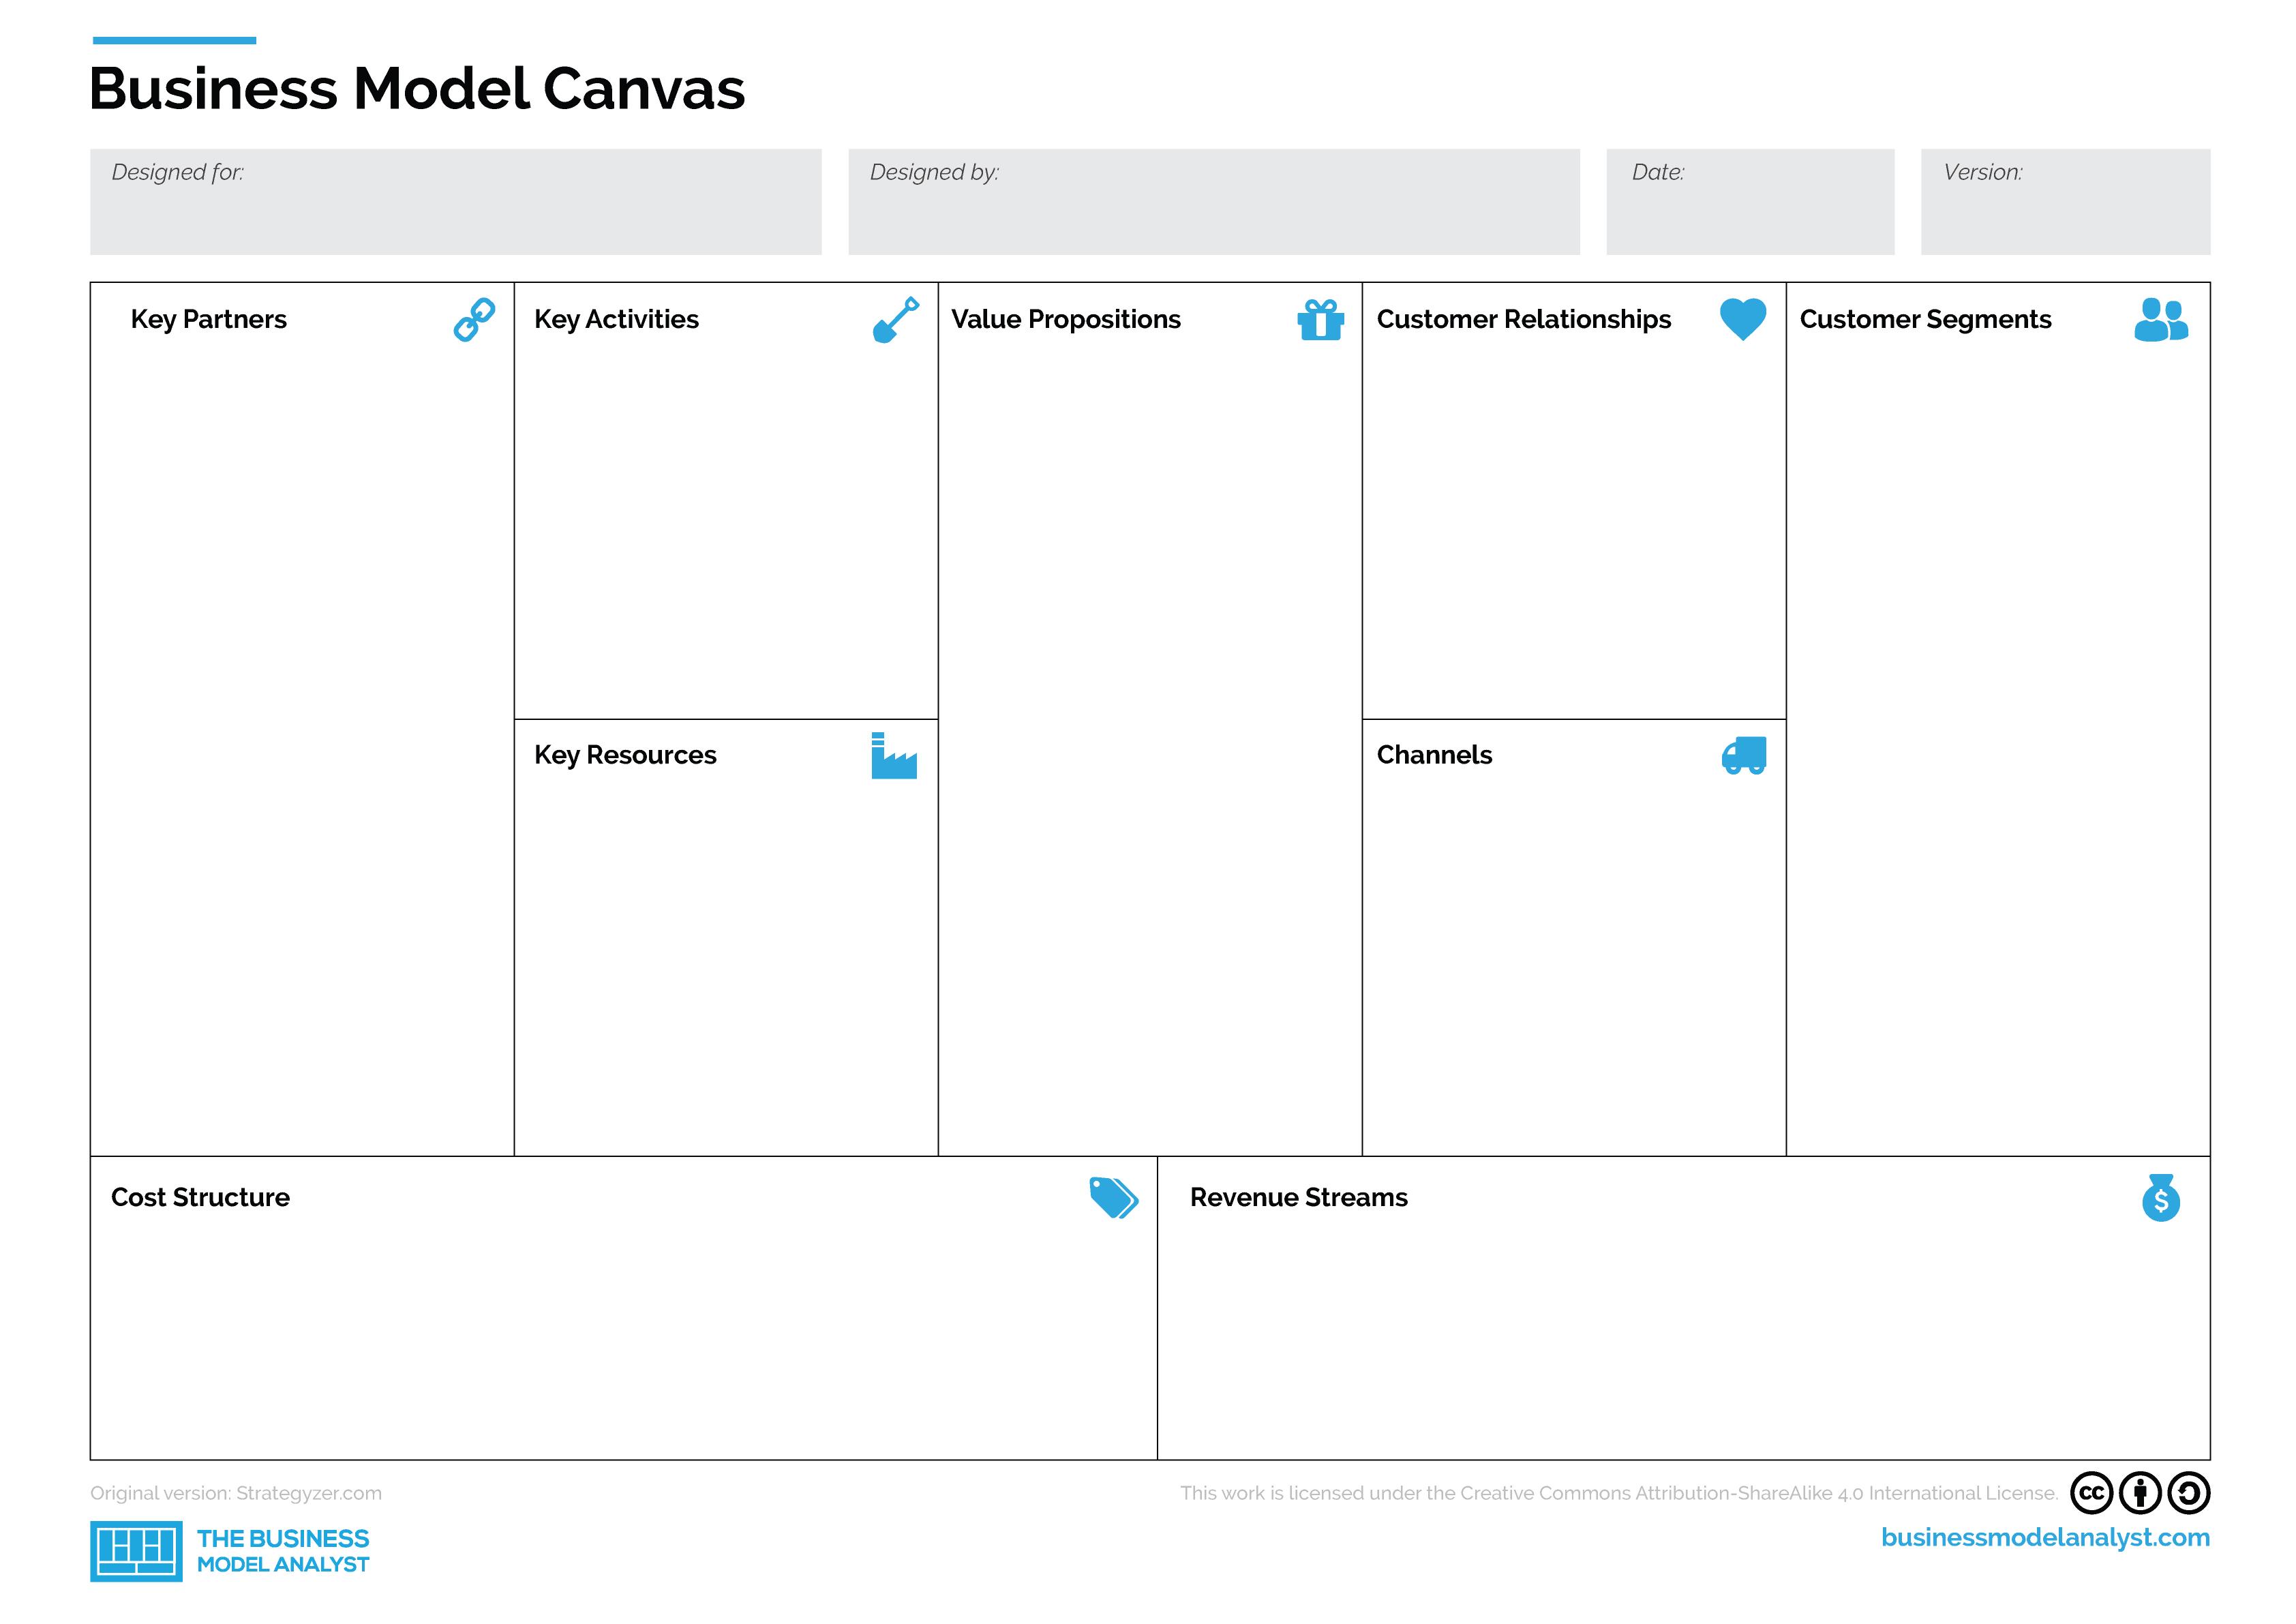 Business Model Canvas Made Easy